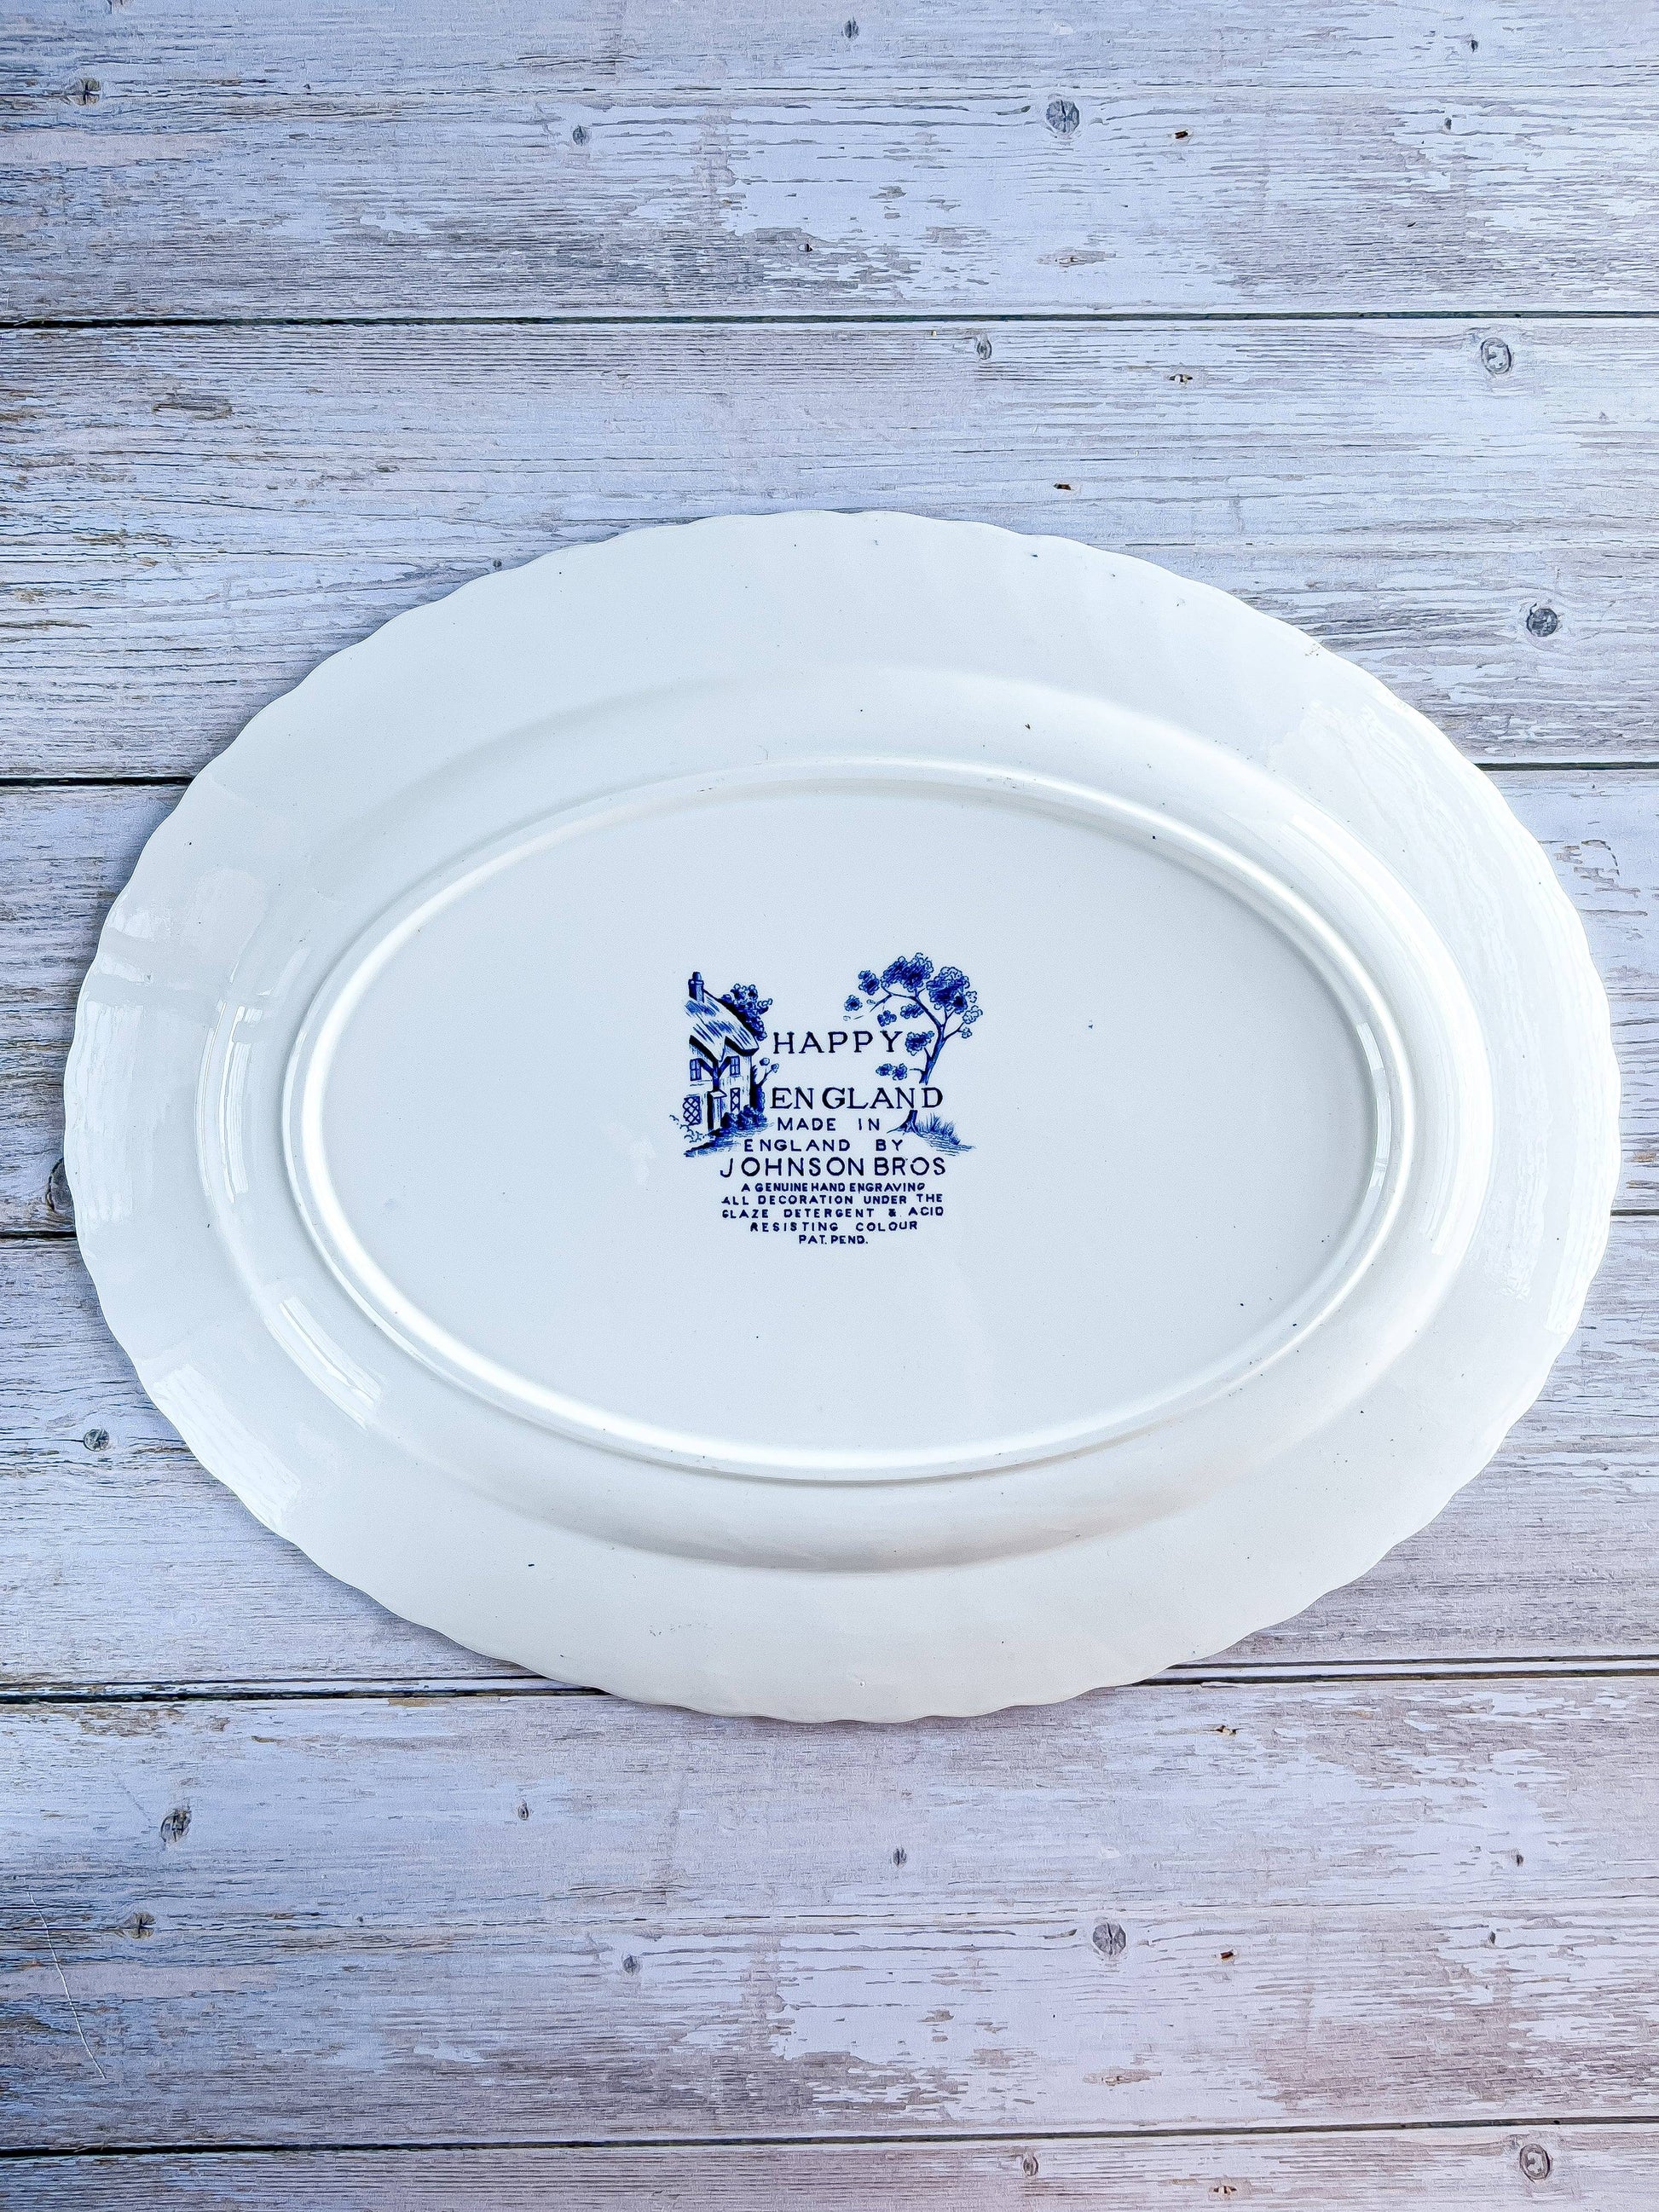 Johnson Bros Large Oval Serving Platter - ‘Happy England’ Collection - SOSC Home